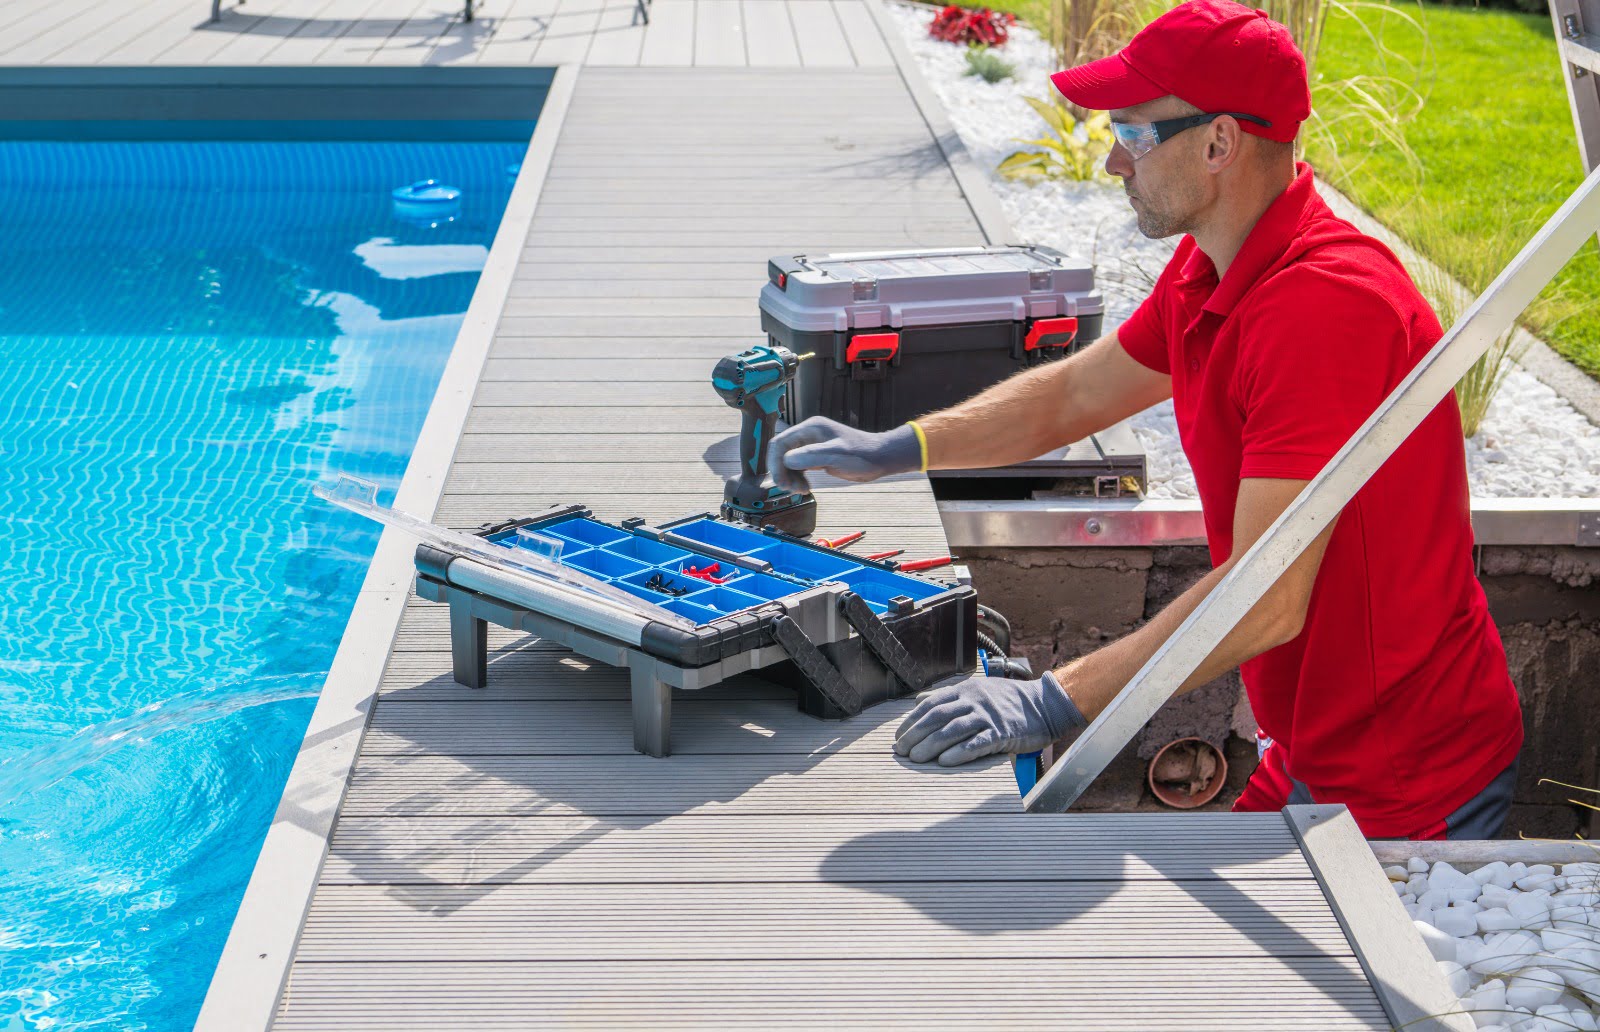 Why Do We Need Professional Help for Pool Maintenance?